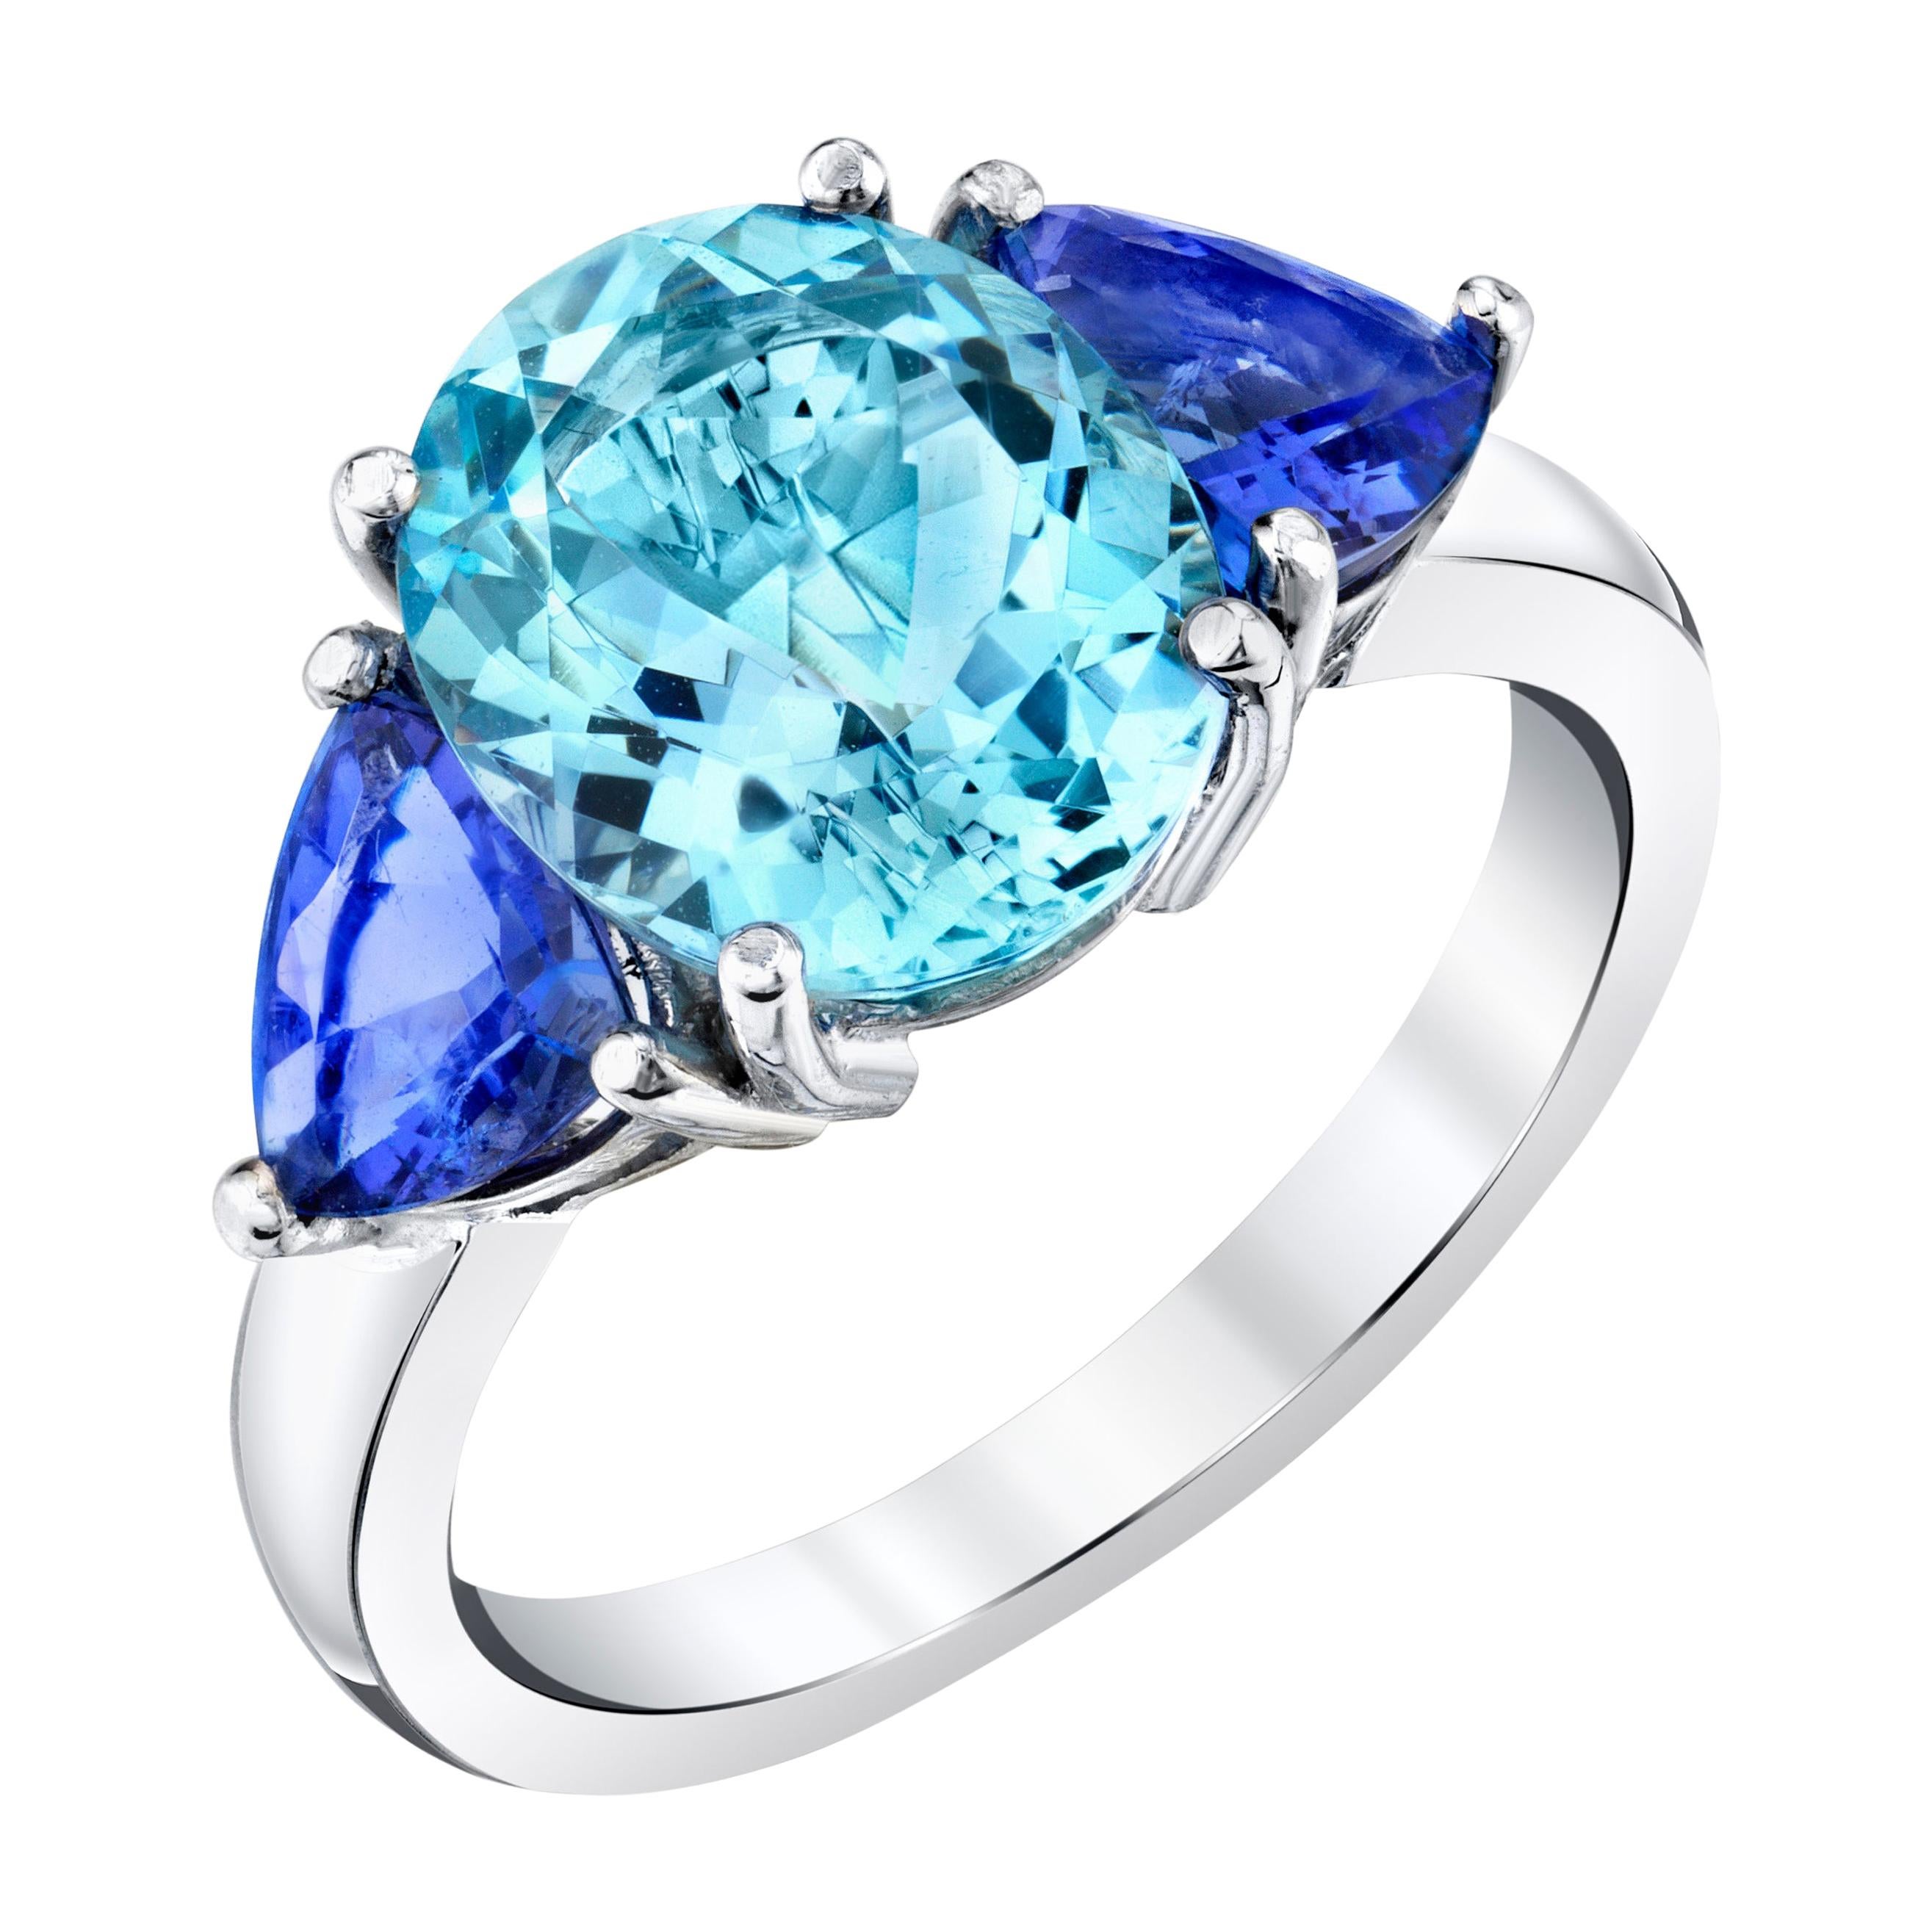 Aquamarine and Blue Sapphire Three-Stone Ring, 3.53 Carats in White Gold